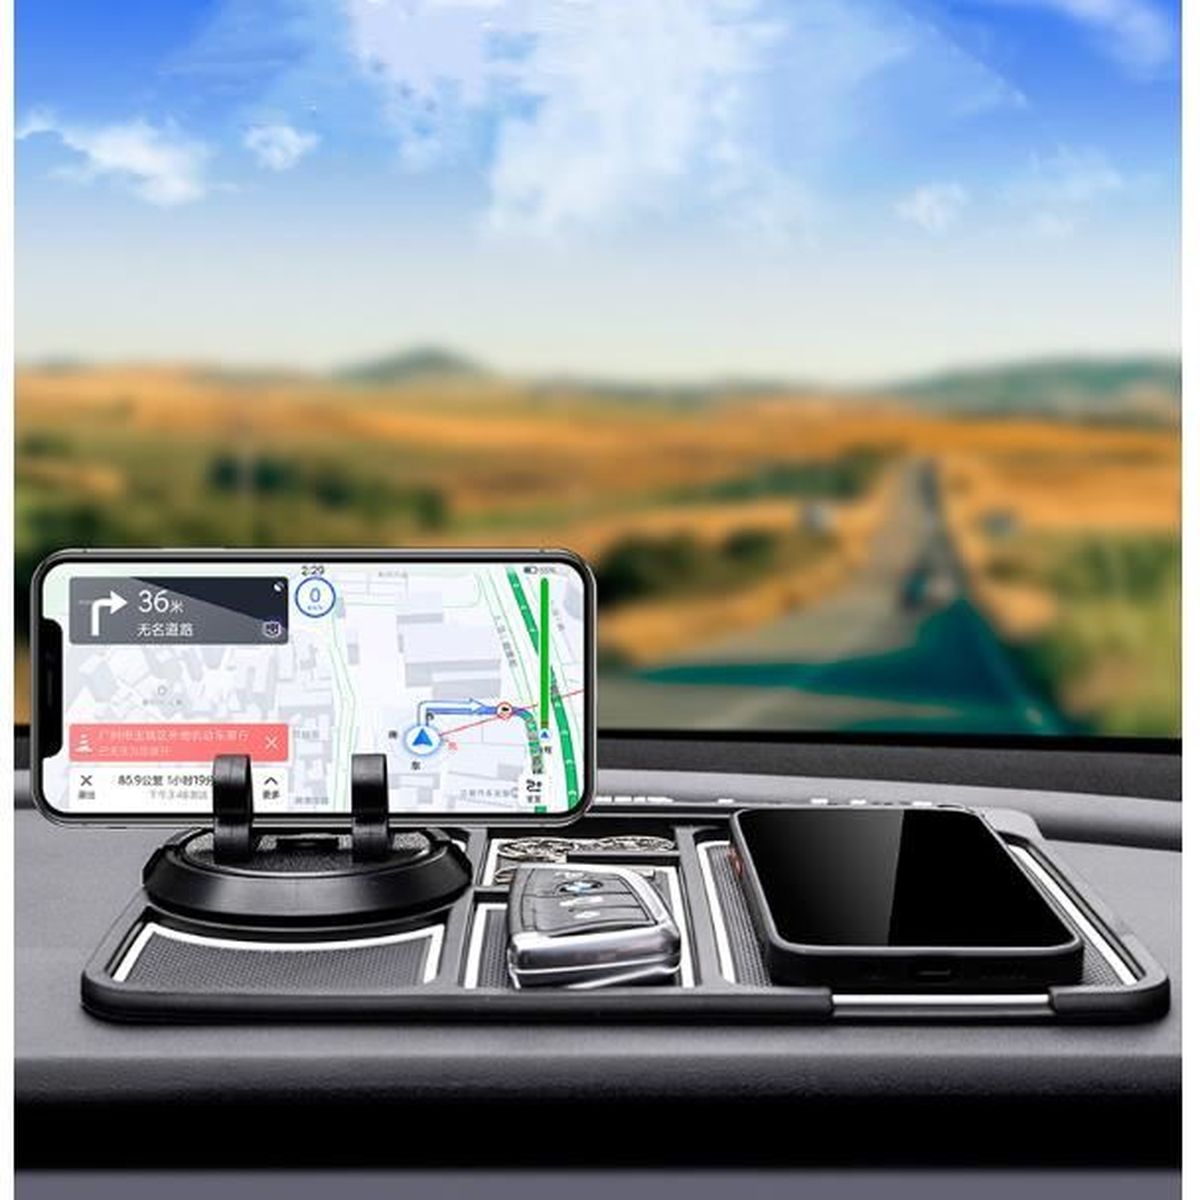 TAPIS ANTIDERAPANT VOITURE SMARTPHONE SILICONE IPHONE SUPPORT CUISINE  COLLANT - Cdiscount Téléphonie